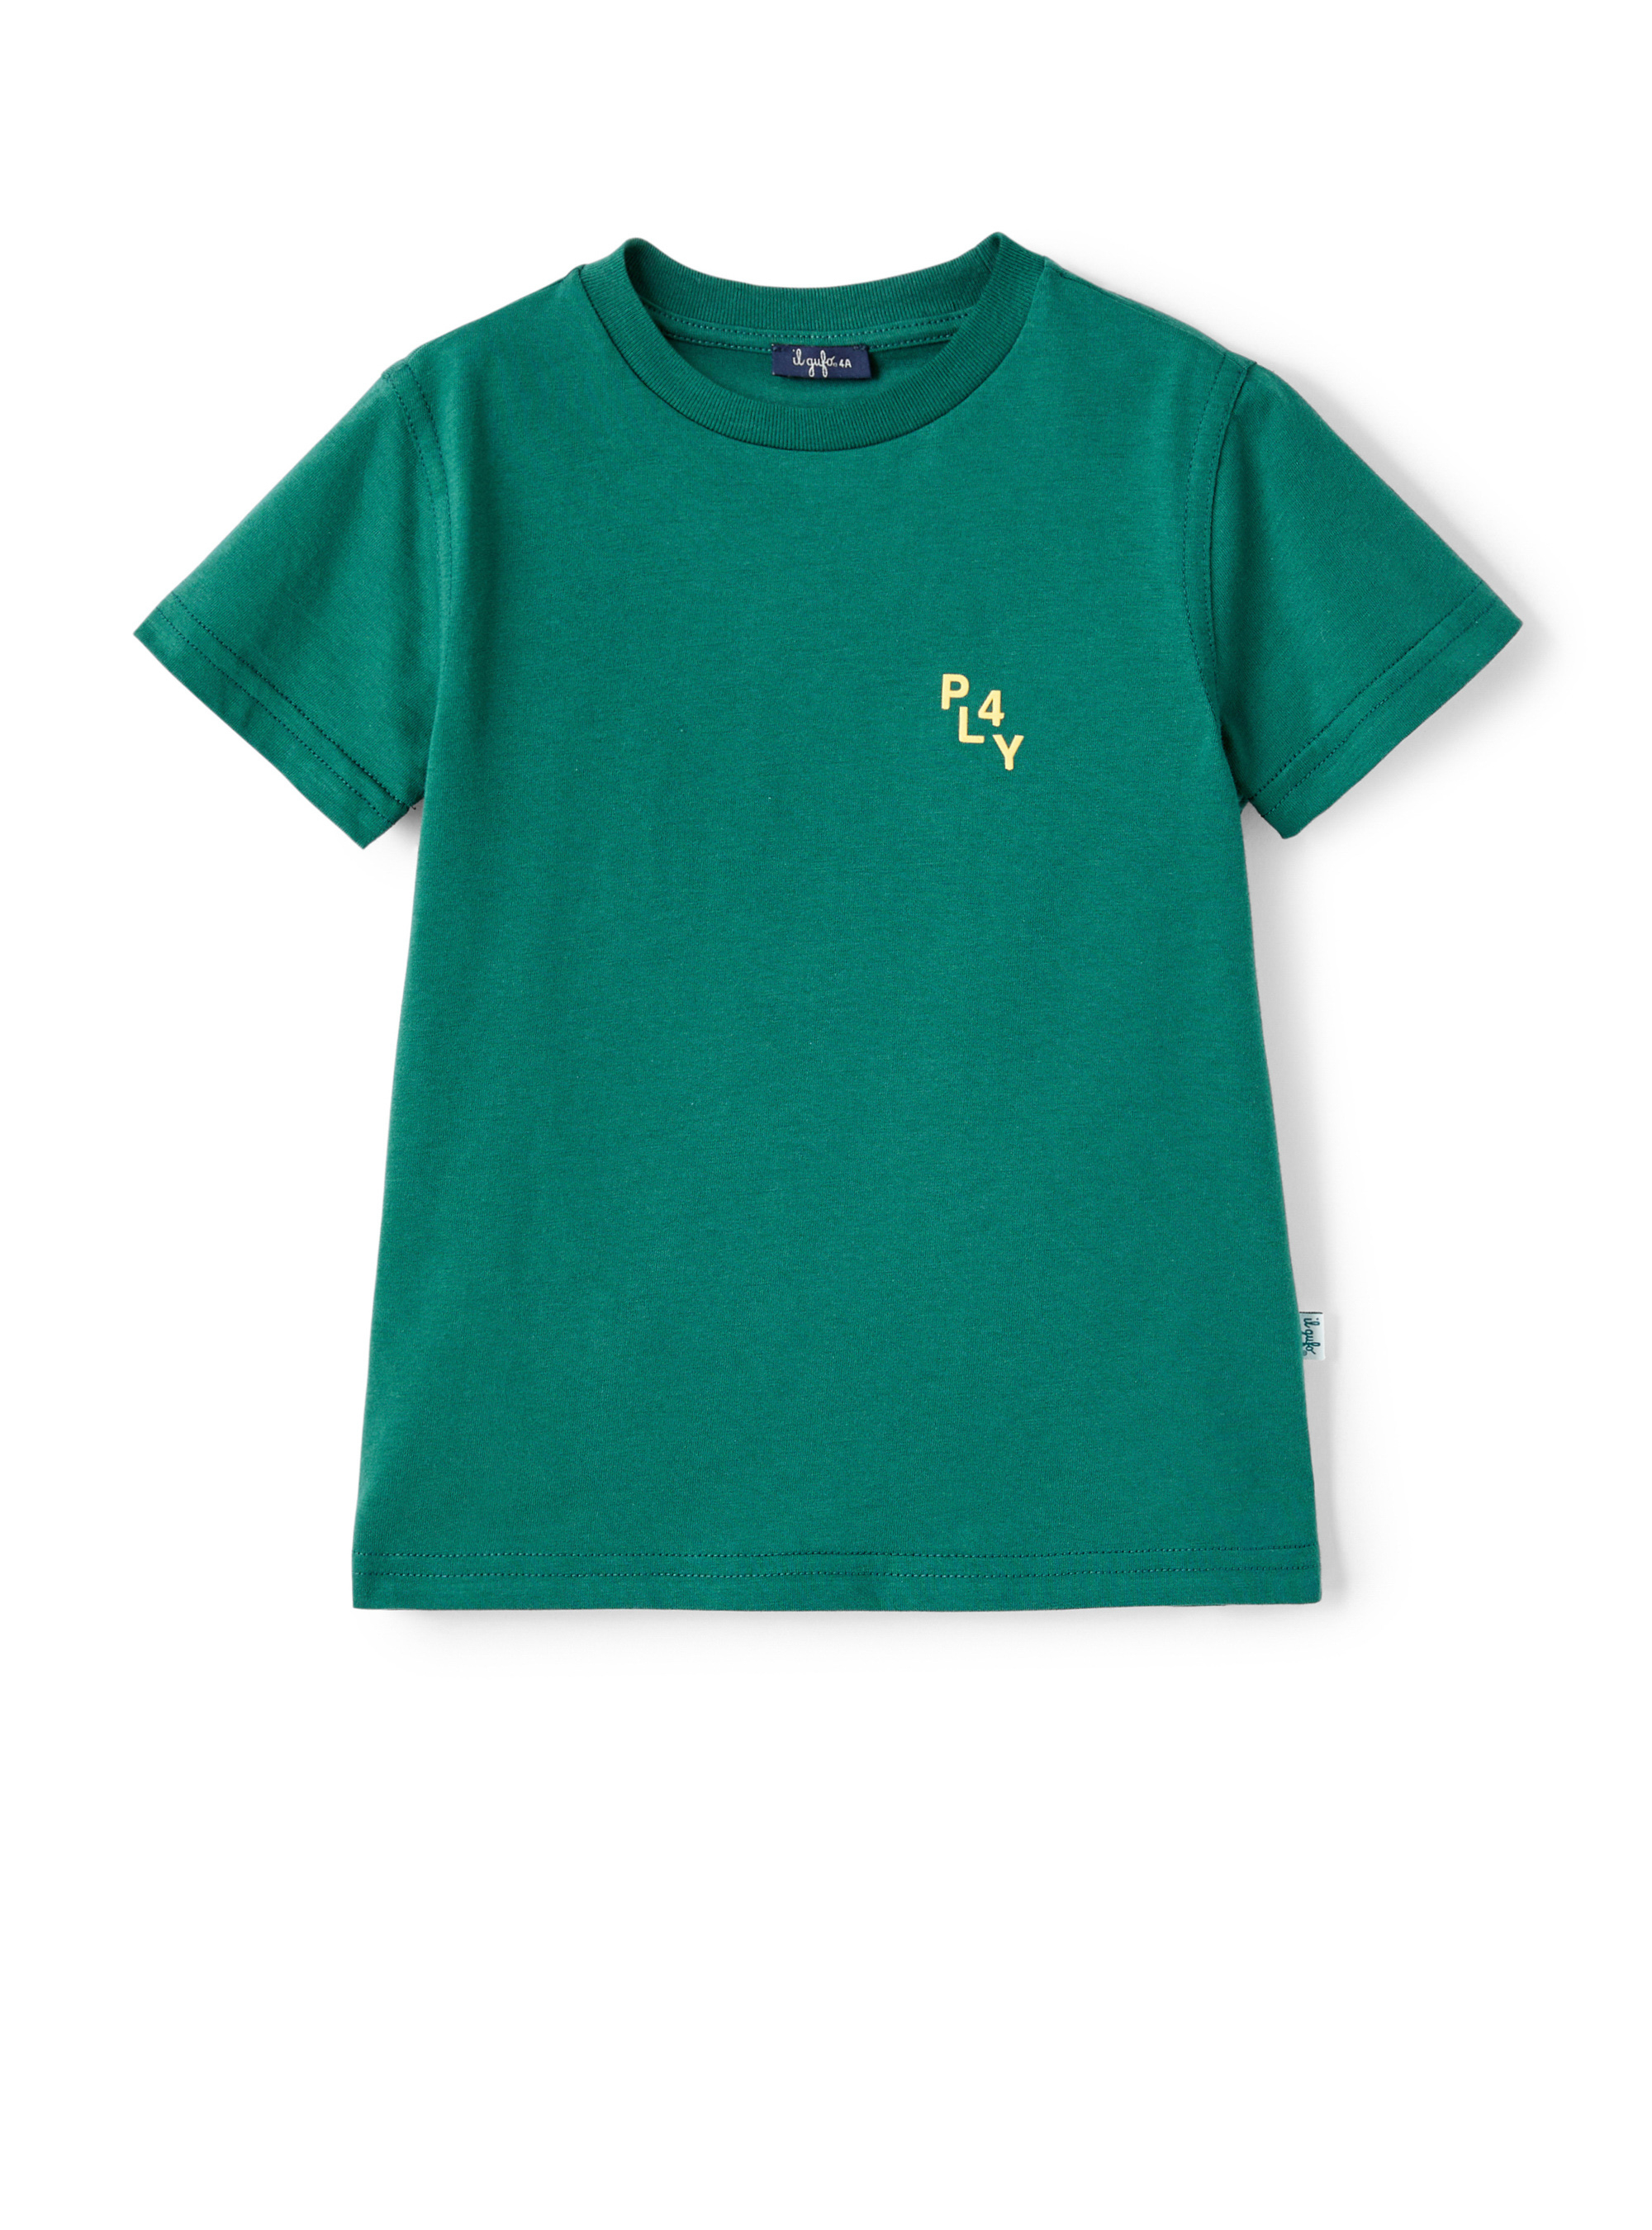 Green t-shirt with print on the back - T-shirts - Il Gufo